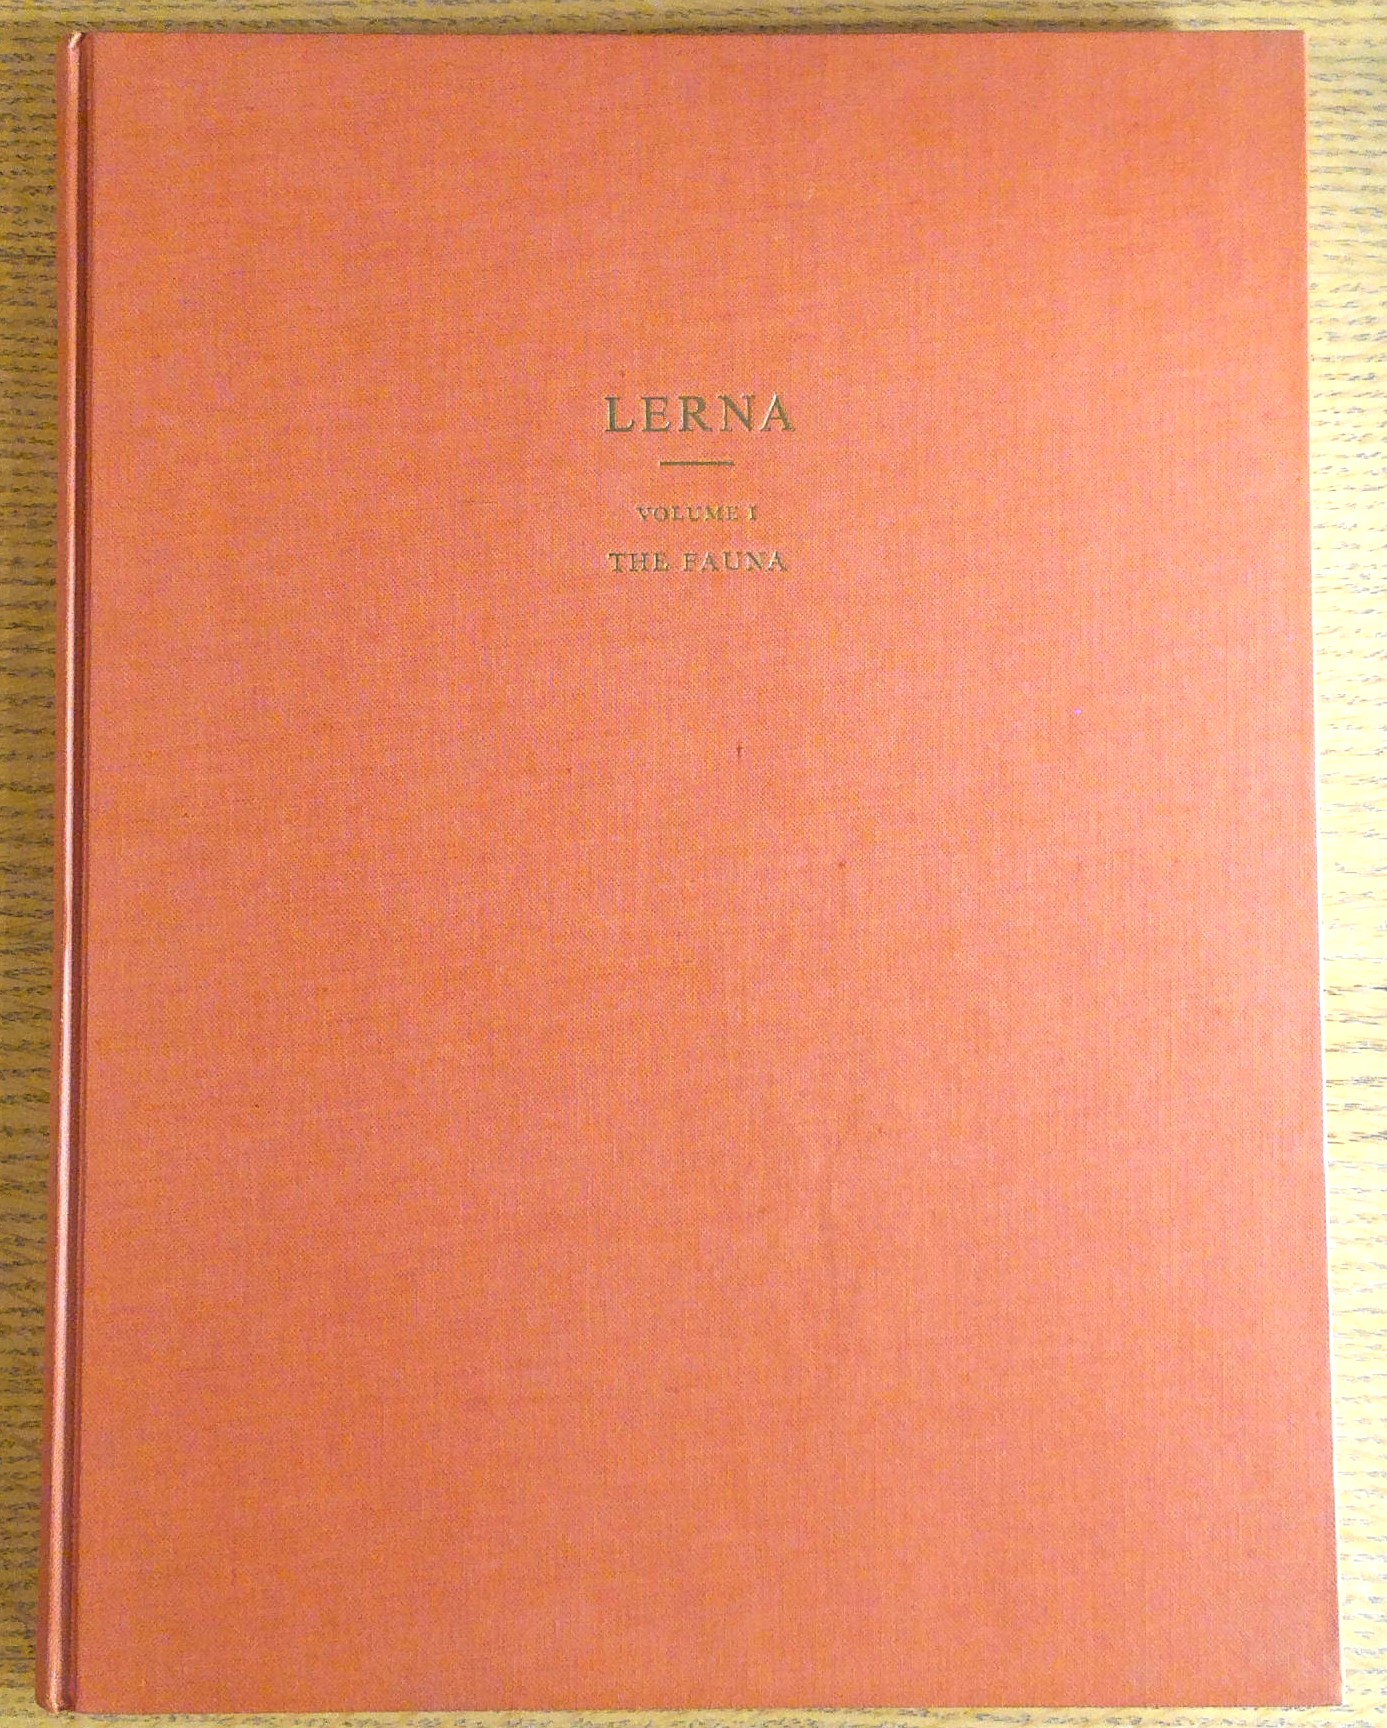 Image for Lerna: A Preclassical Site in the Argolid, Results of Excavations Conducted by The American School of Classical Studies at Athens. Volume I: The Fauna